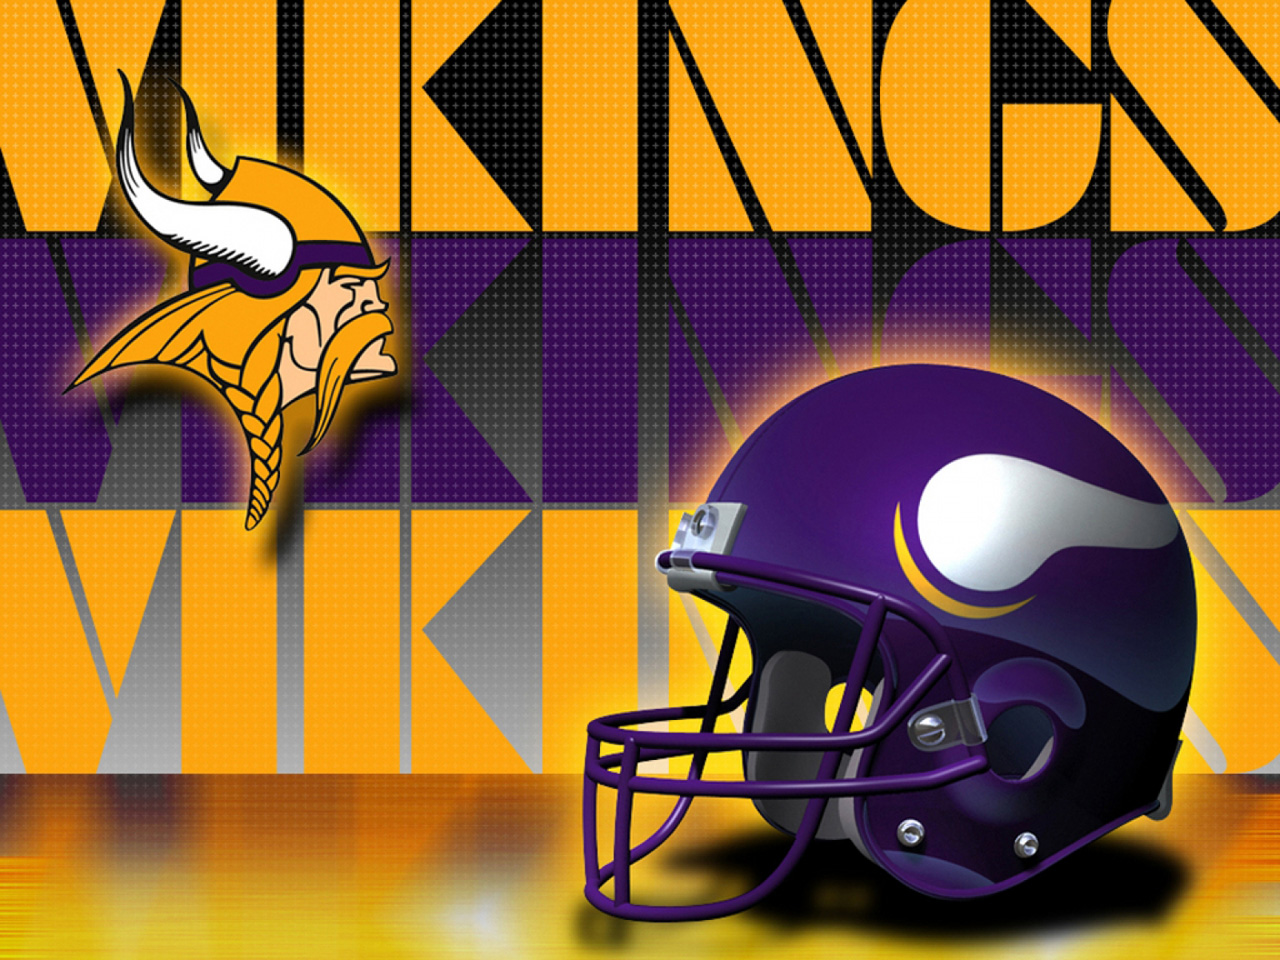 Wallpaper Or Check Out These Vikings iPhone And